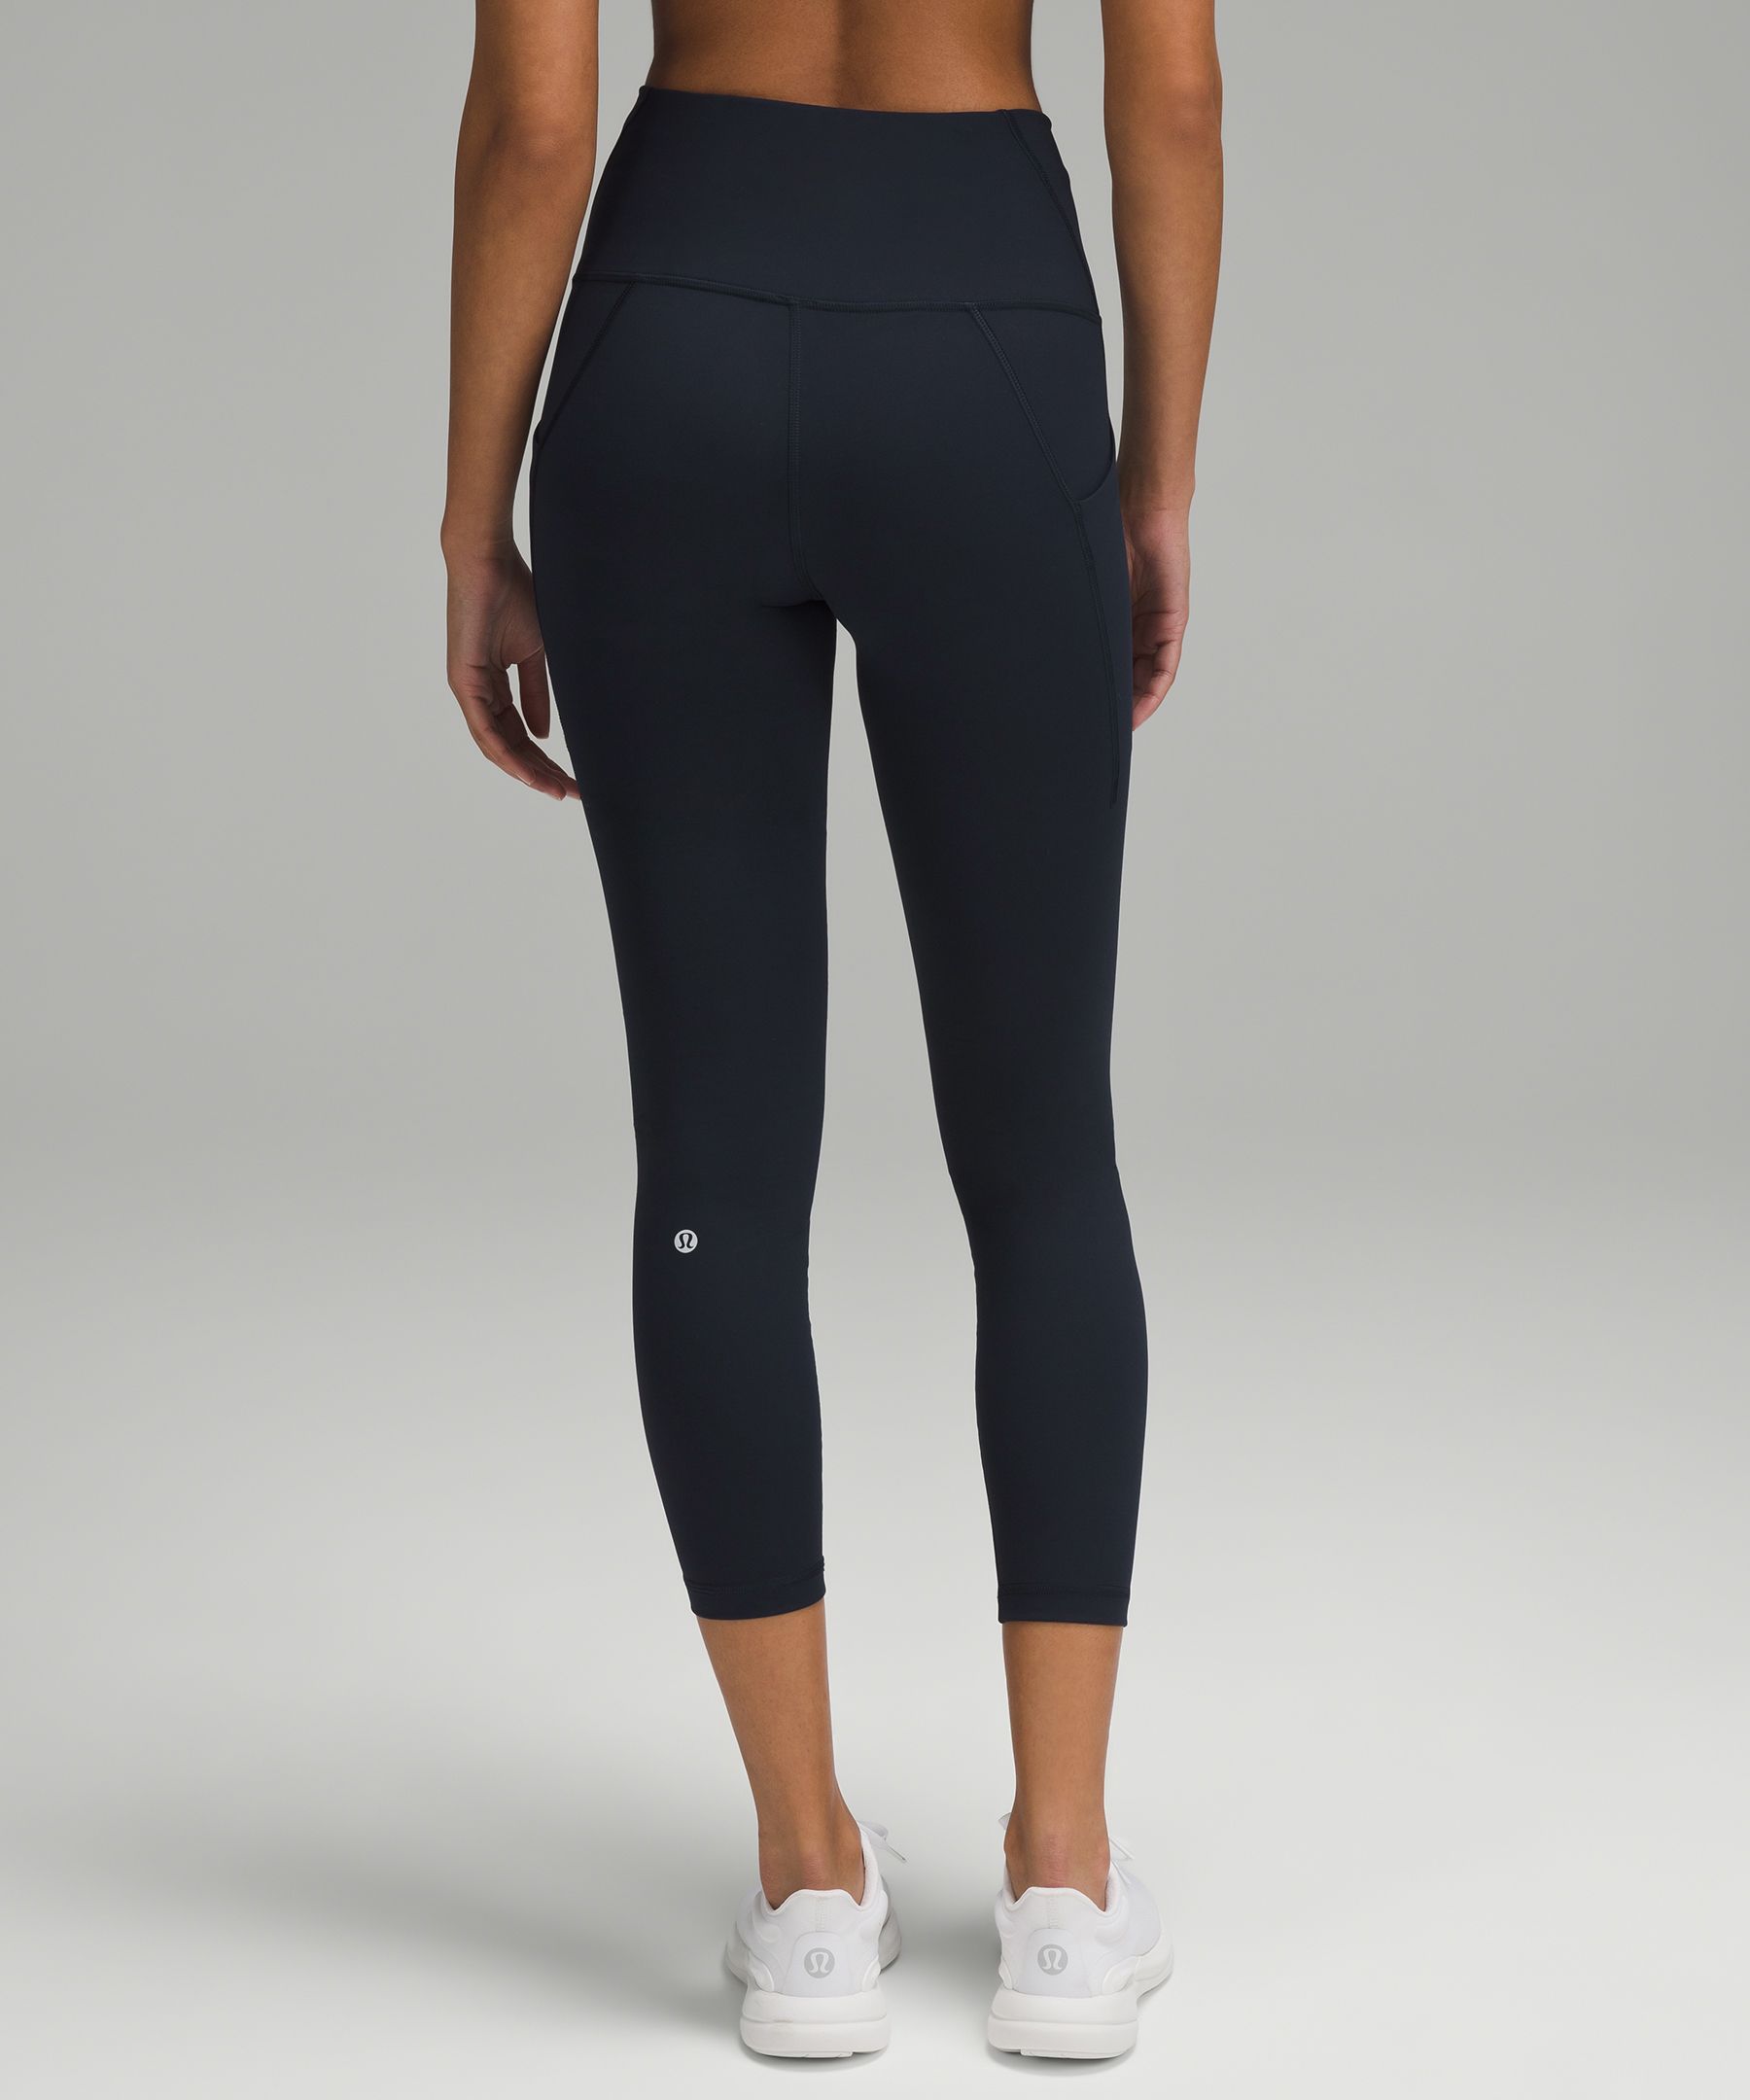 Wunder Train High-Rise Tight with Pockets 25 - Lululemon